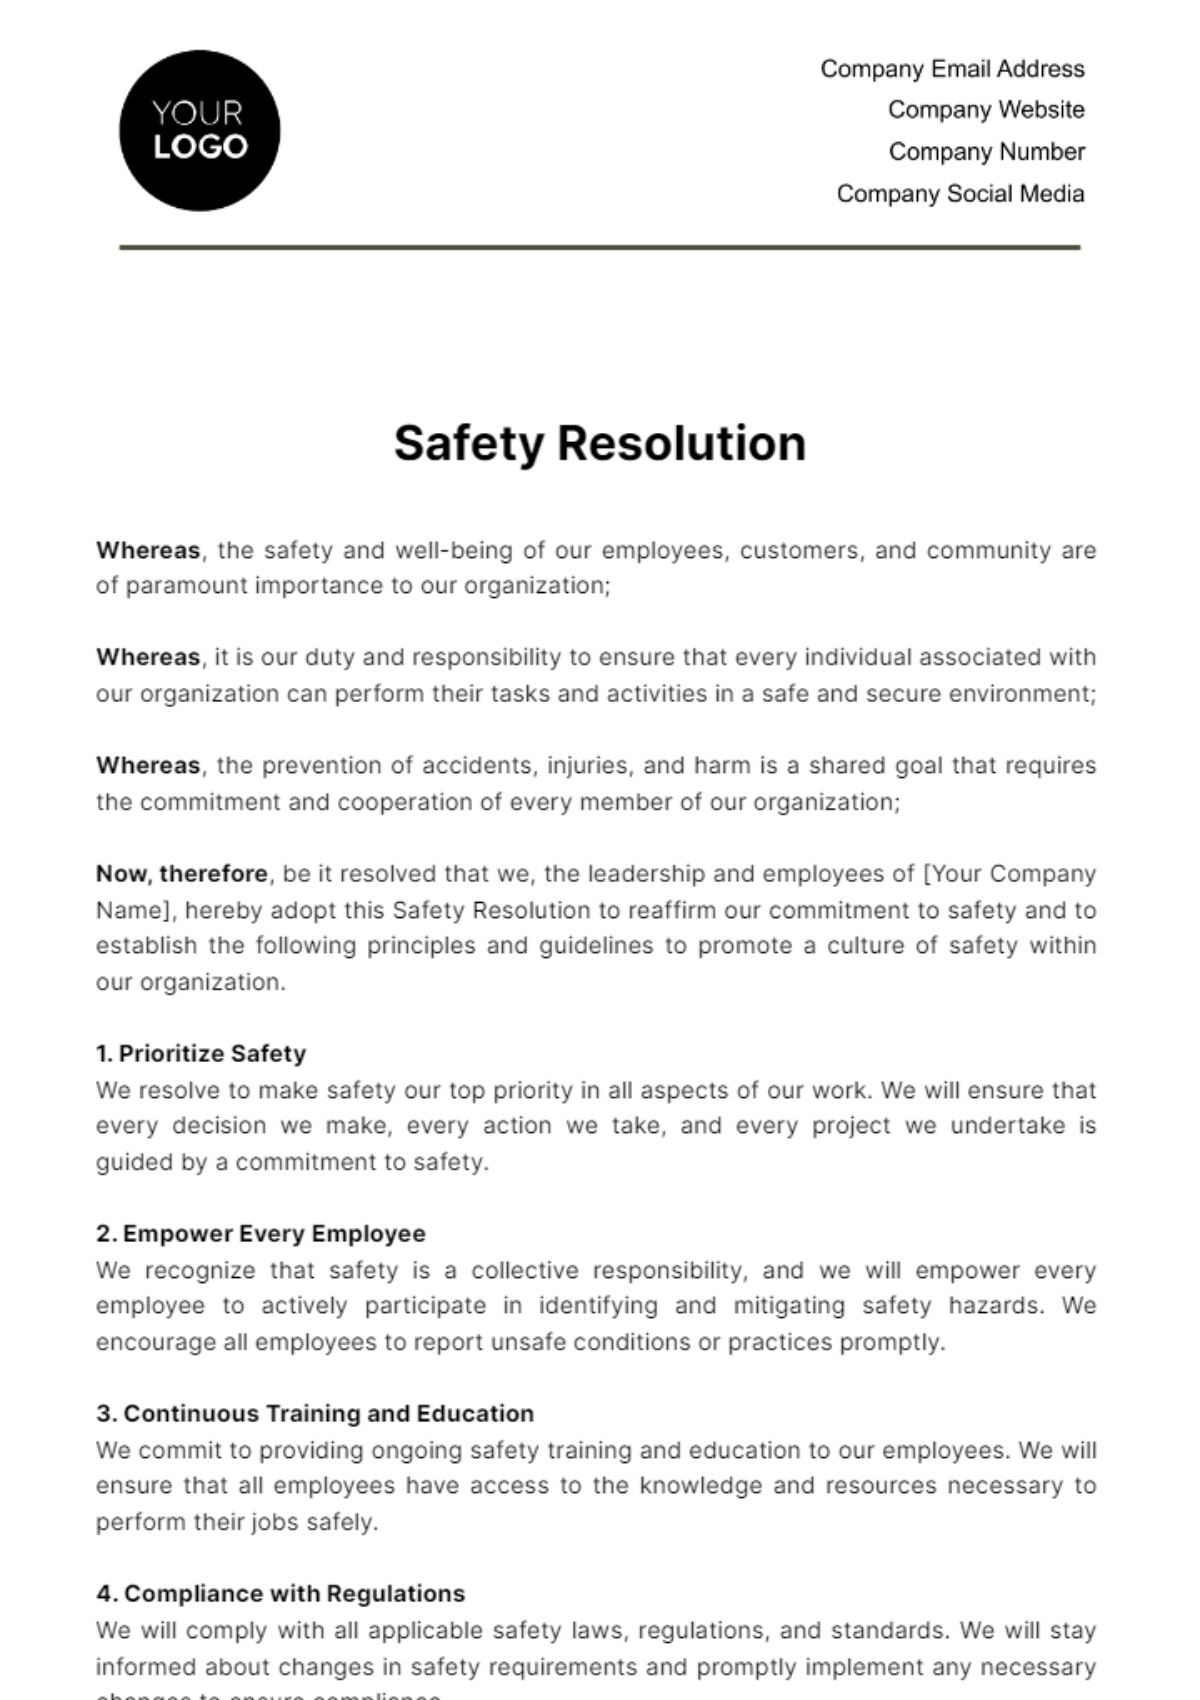 Free Safety Resolution HR Template